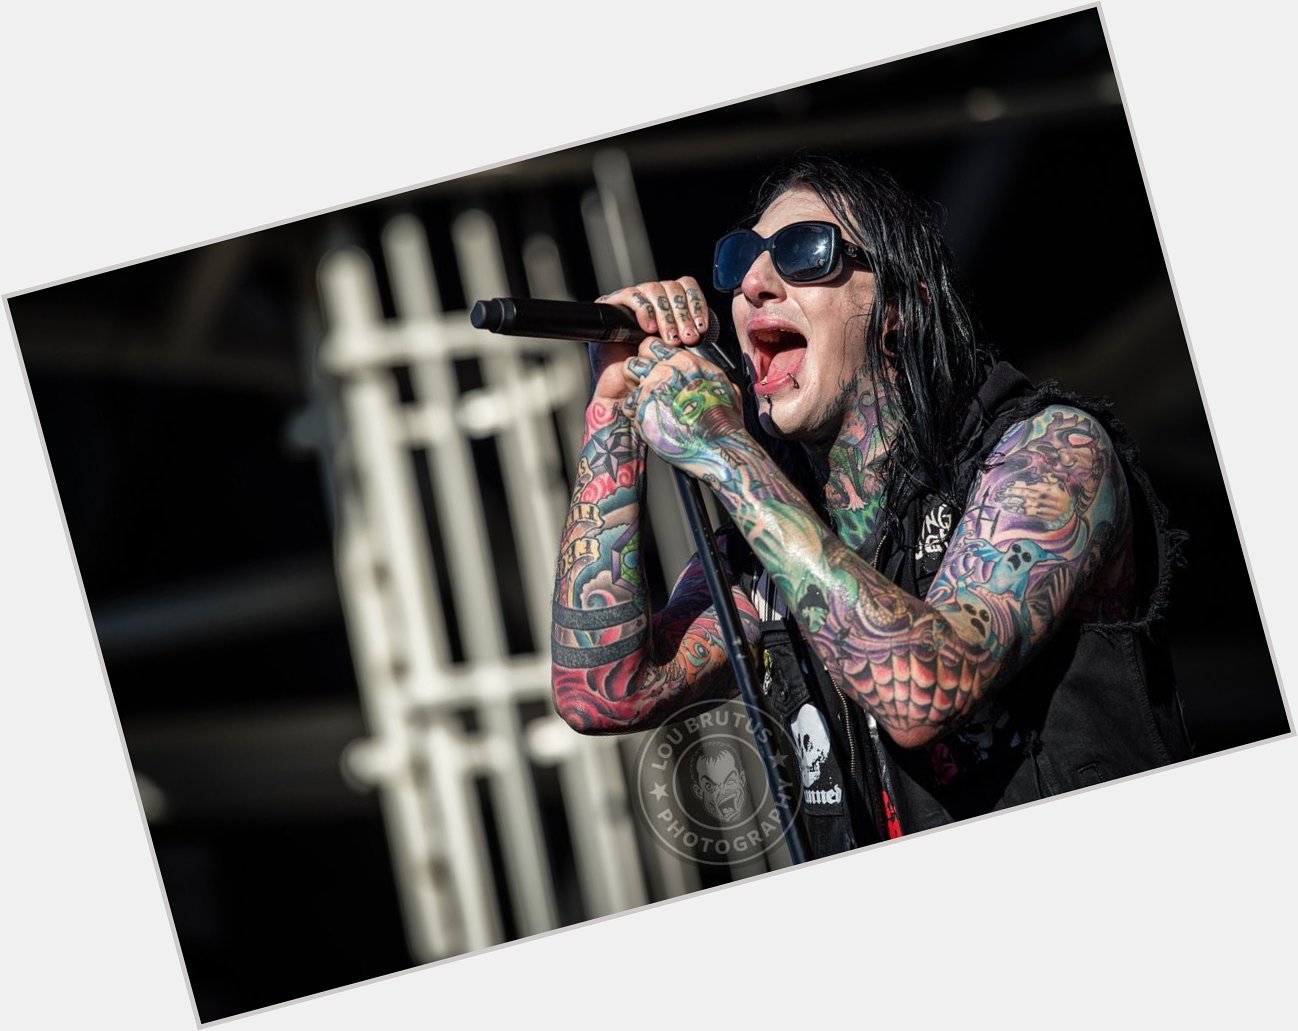 Happy Birthday to Chris Motionless of Motionless in White.  